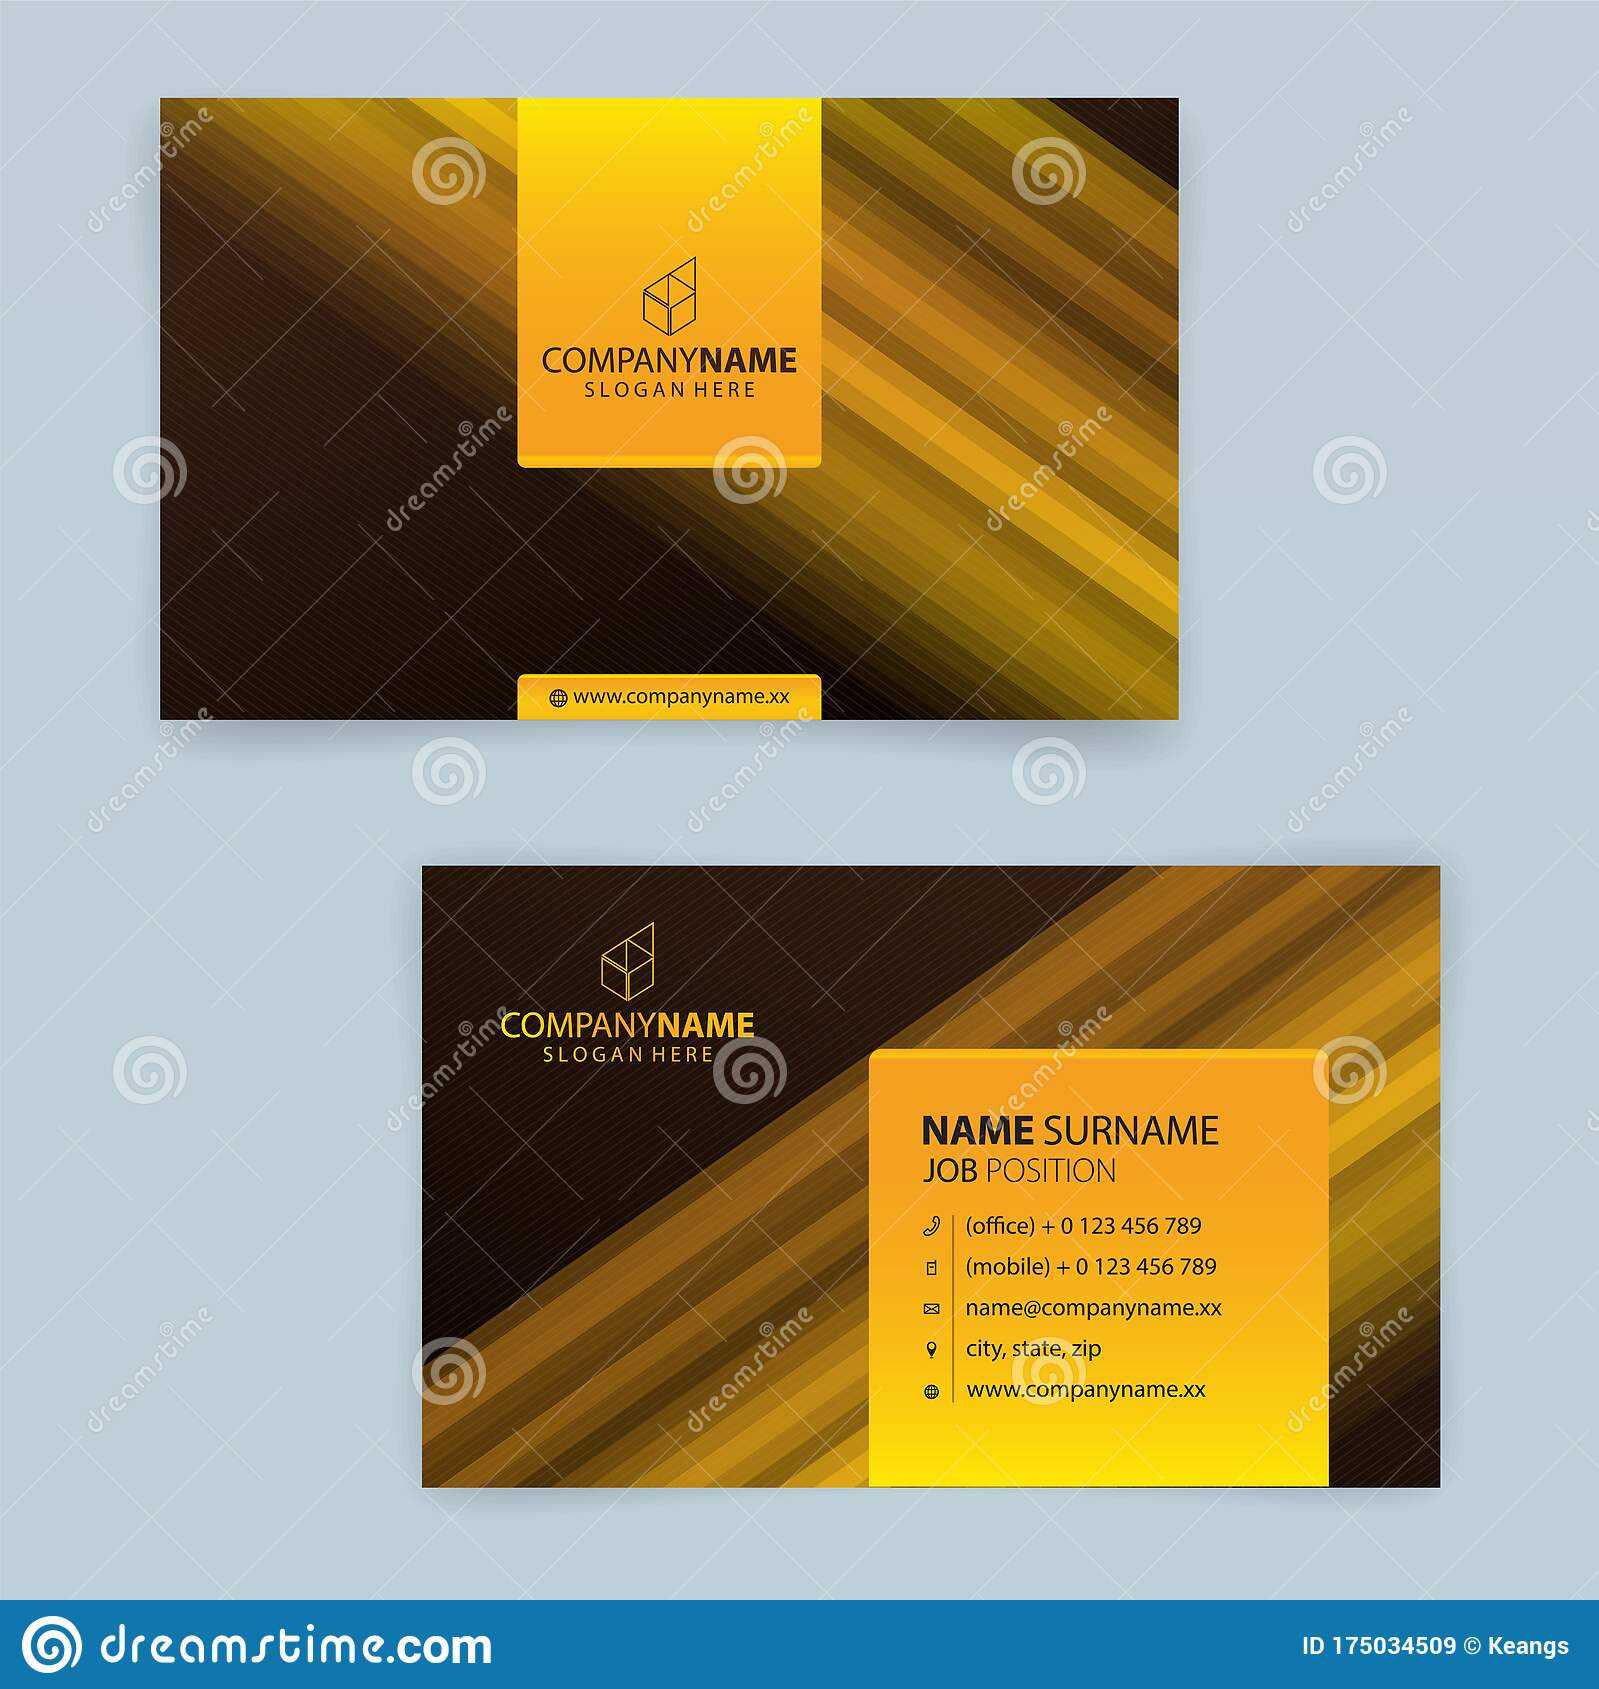 Luxury Gold Business Card Template Stock Illustration In Office Max Business Card Template